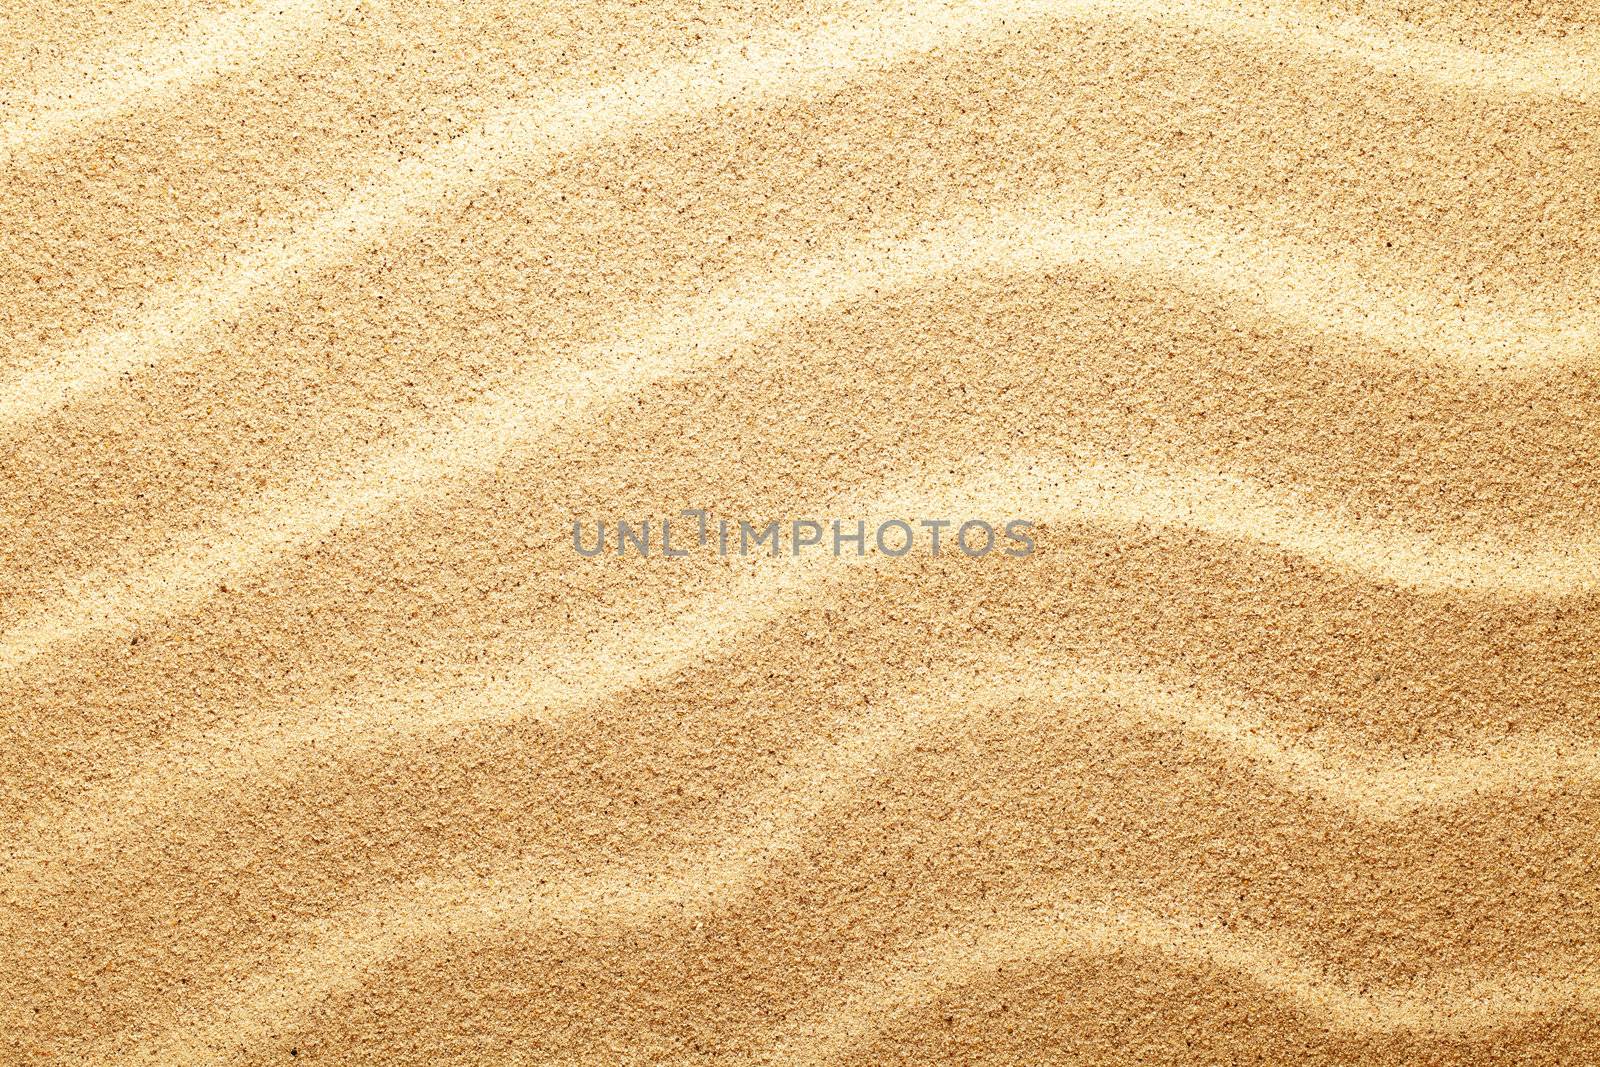 Sandy beach. Sand texture for background. Top view